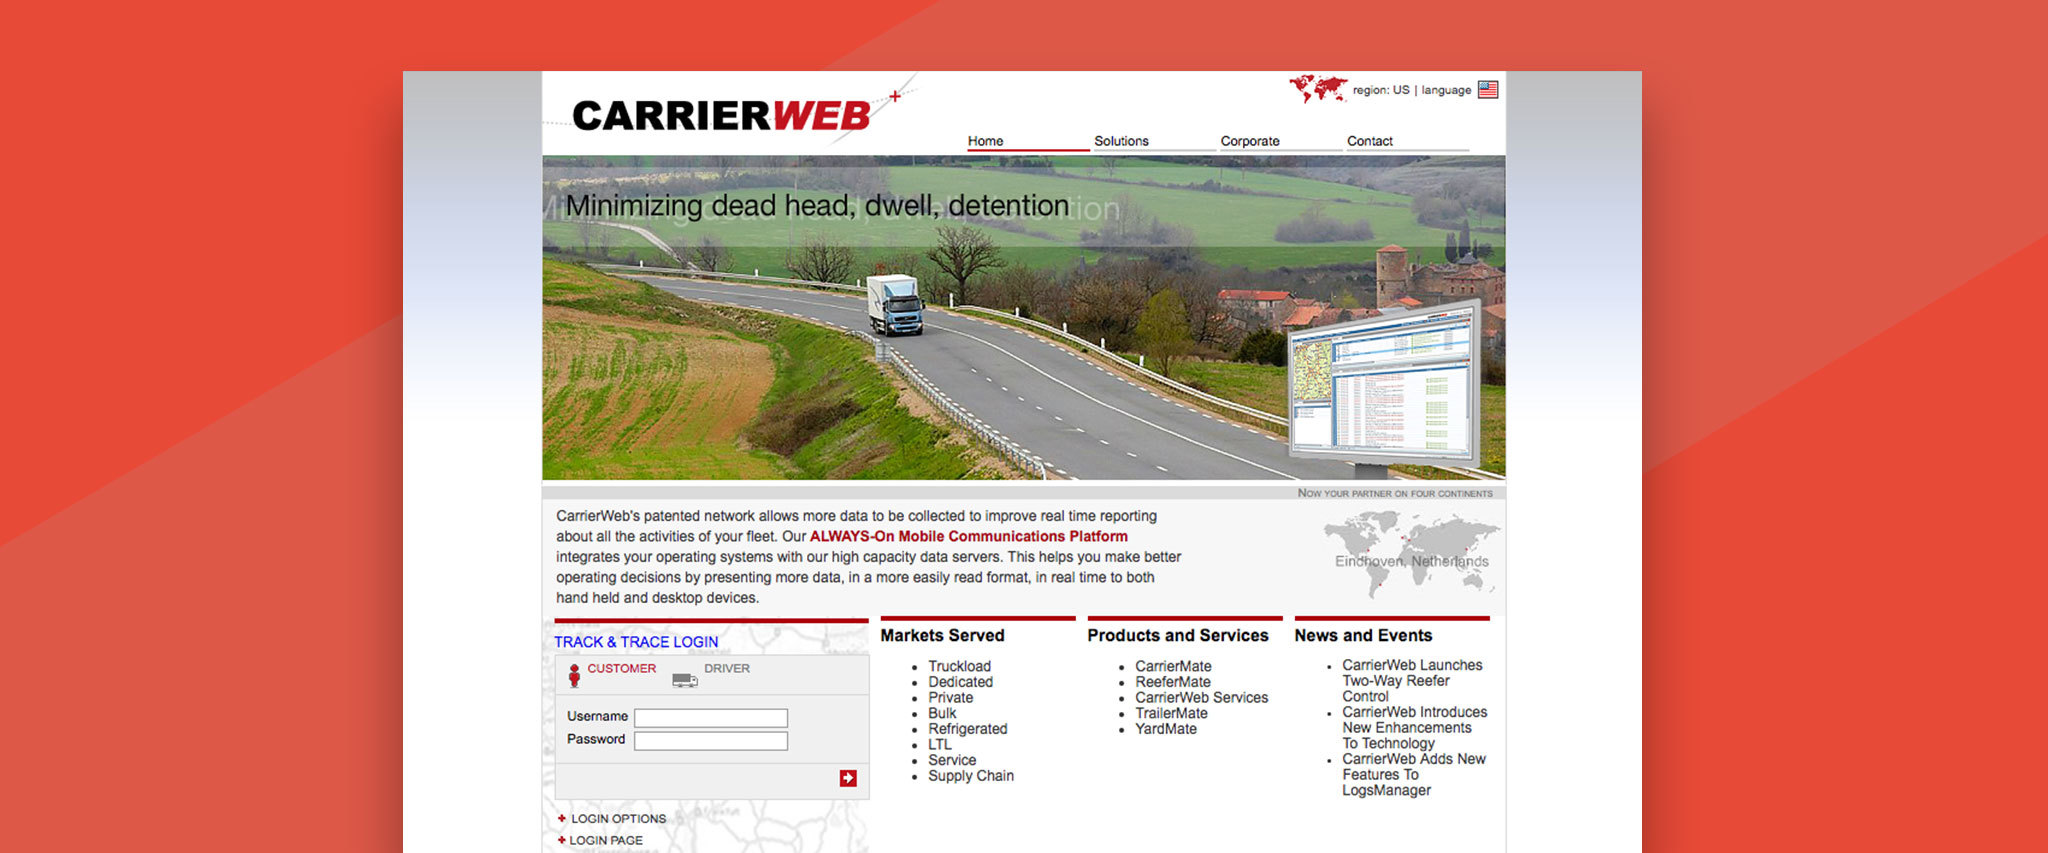 CarrierWeb® Gallery